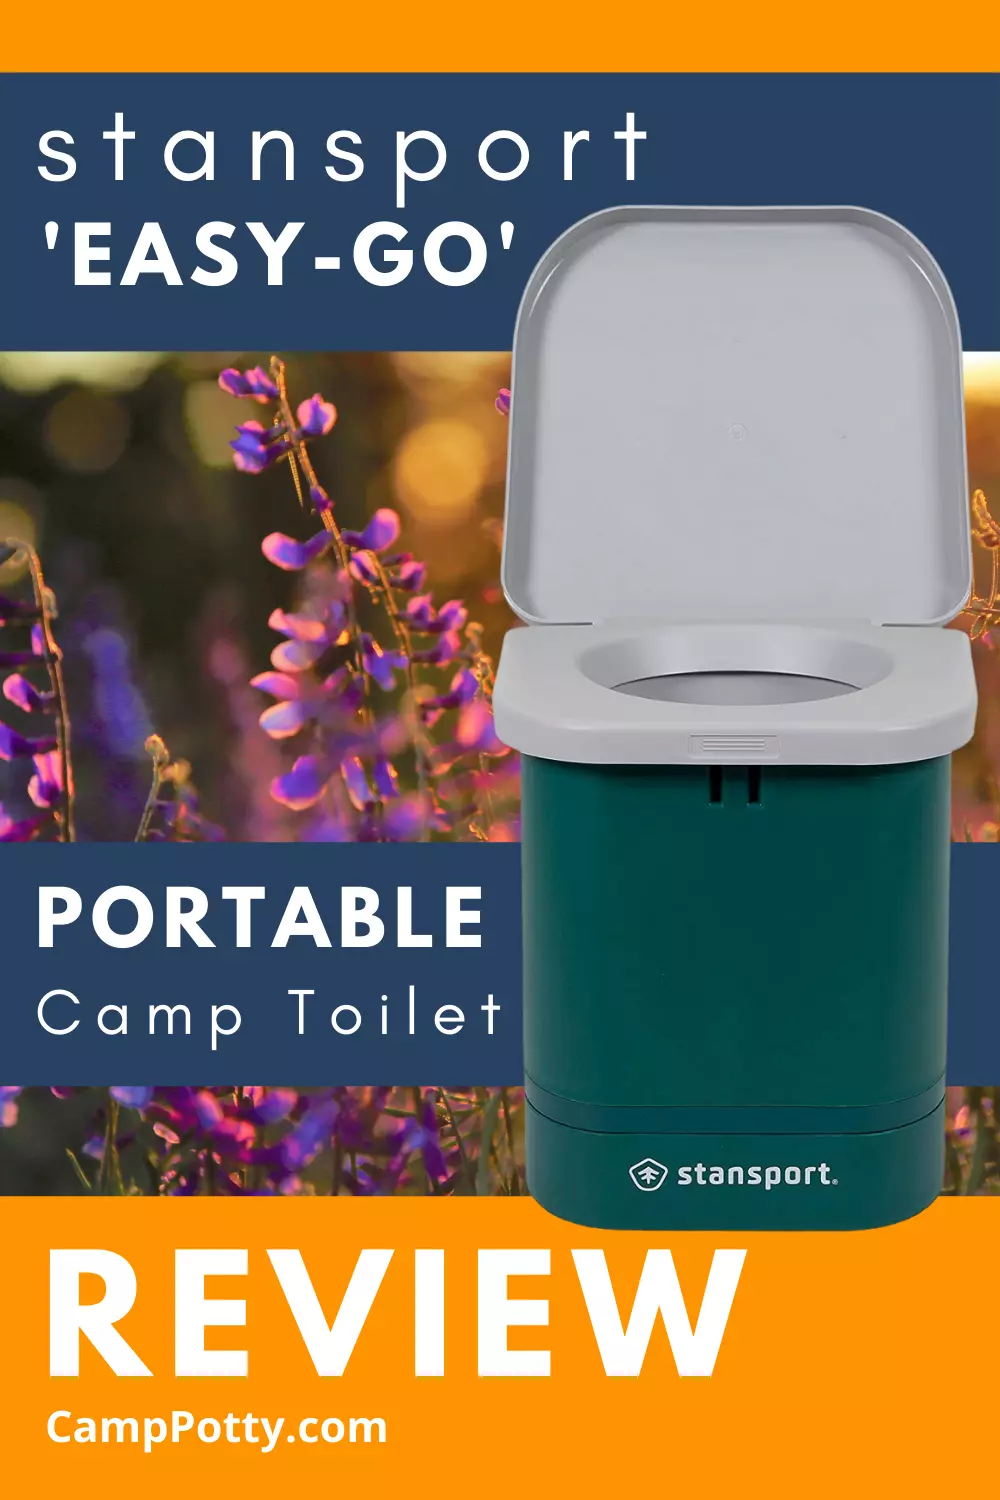 Stansport 'Easy-Go' Portable Camping Toilet Review
